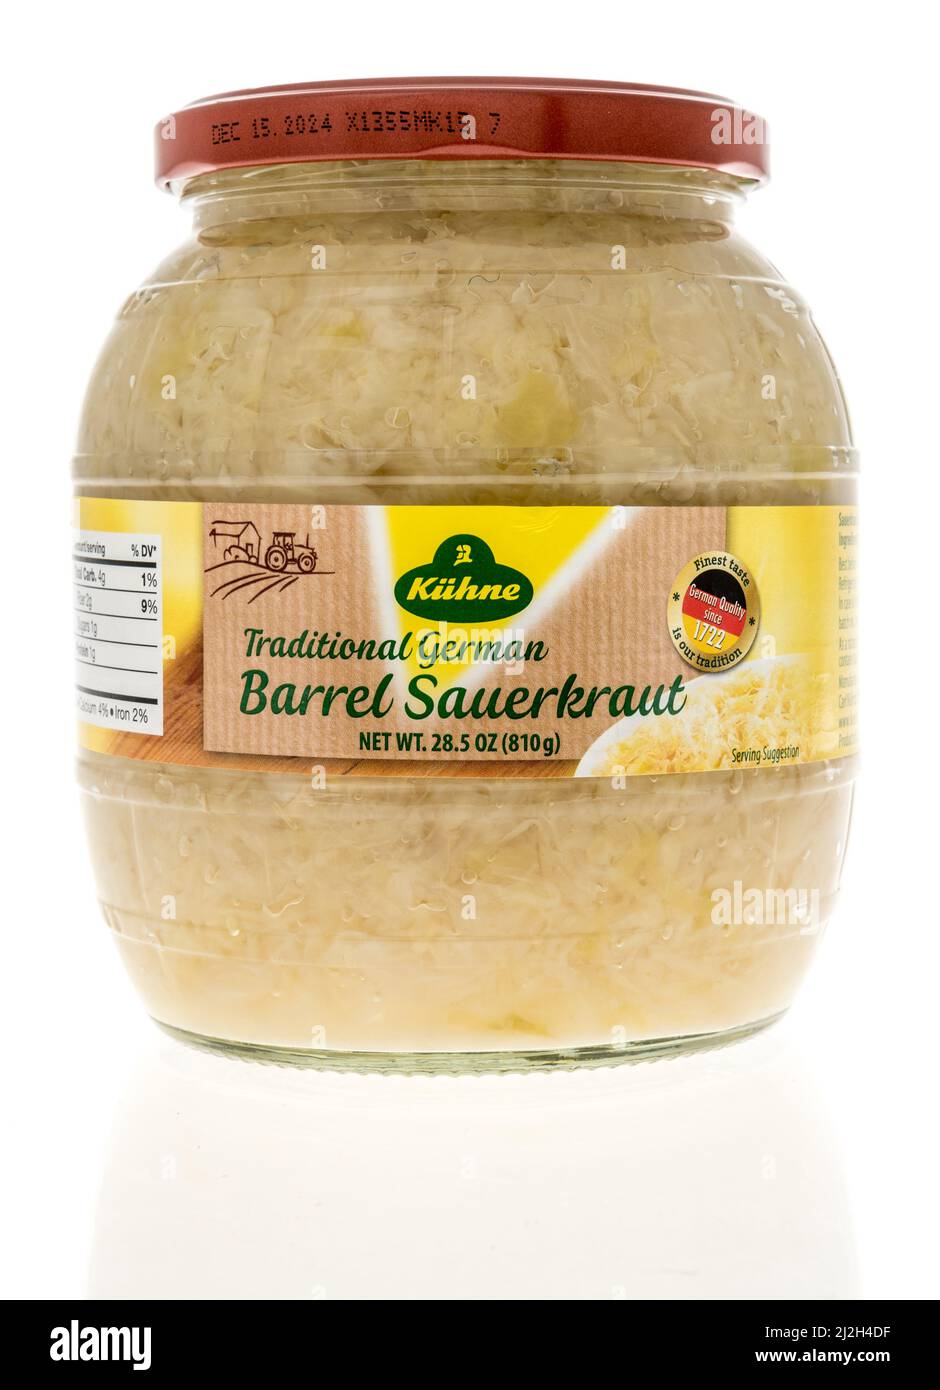 Winneconne, WI -1 April 2022: A package of Kuehne sauerkraut on an isolated background Stock Photo